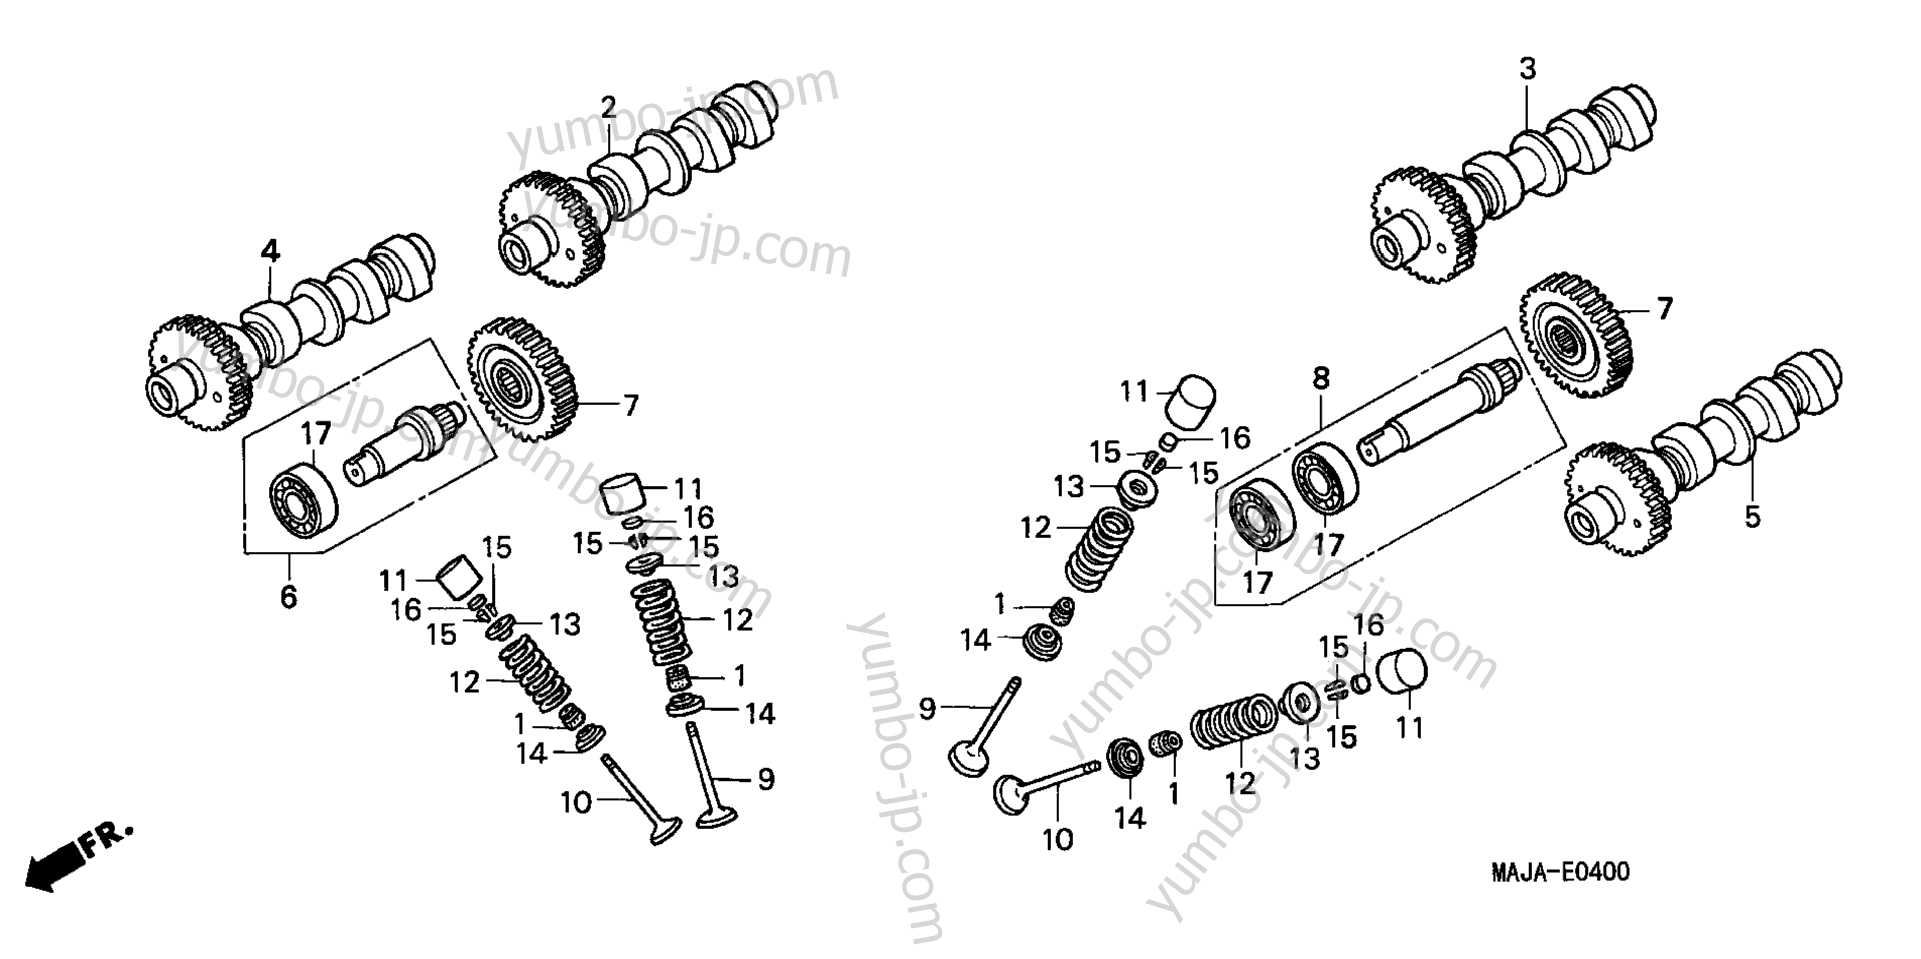 CAMSHAFT / VALVE for motorcycles HONDA ST1100A A 1999 year